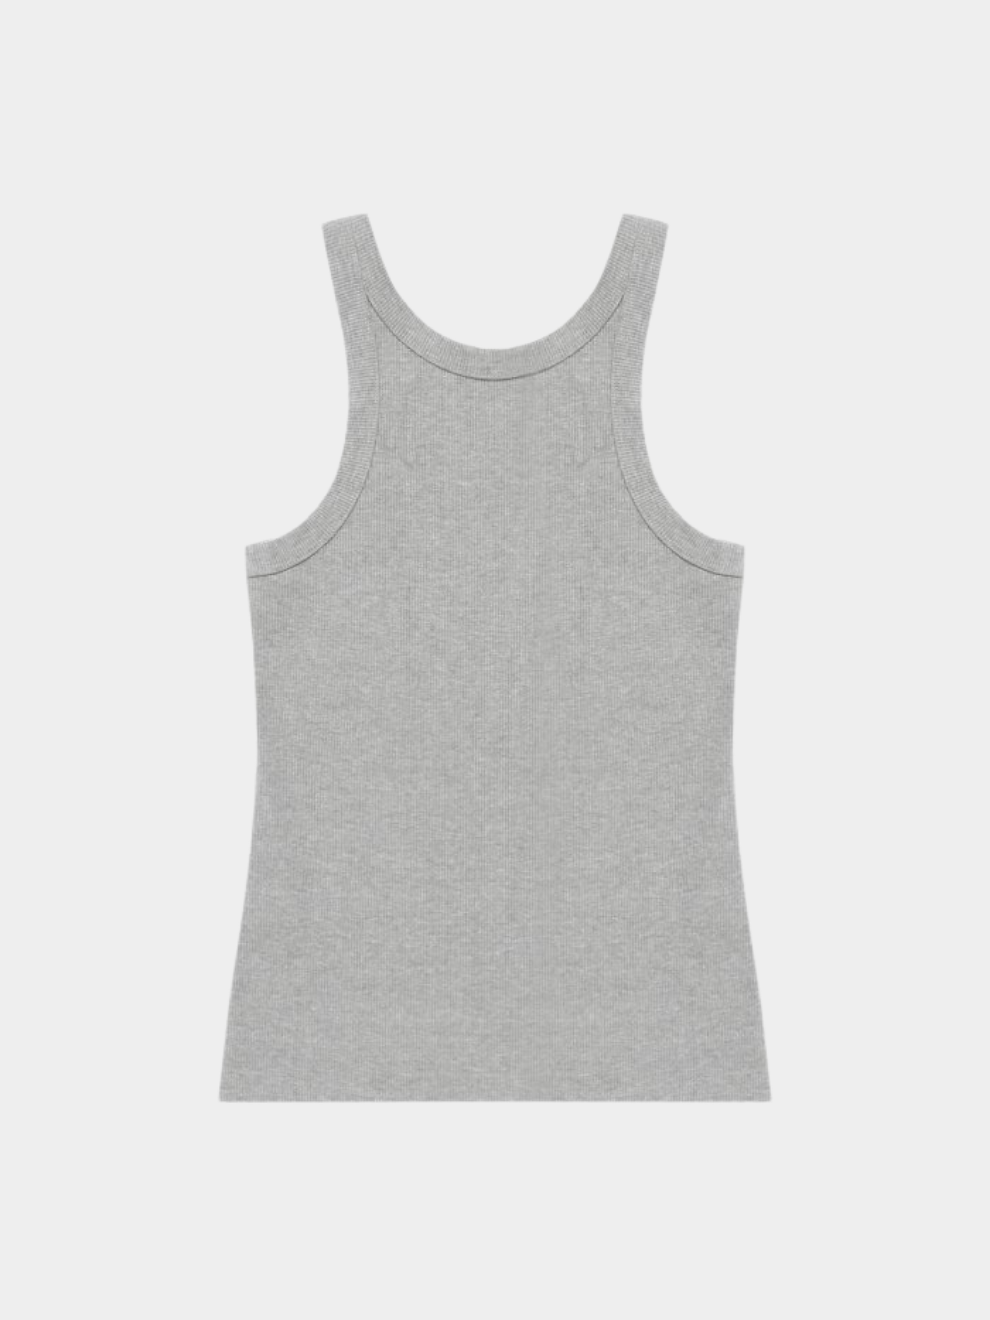 Front view of Grey Chin Ups Tank by MOTHER denim